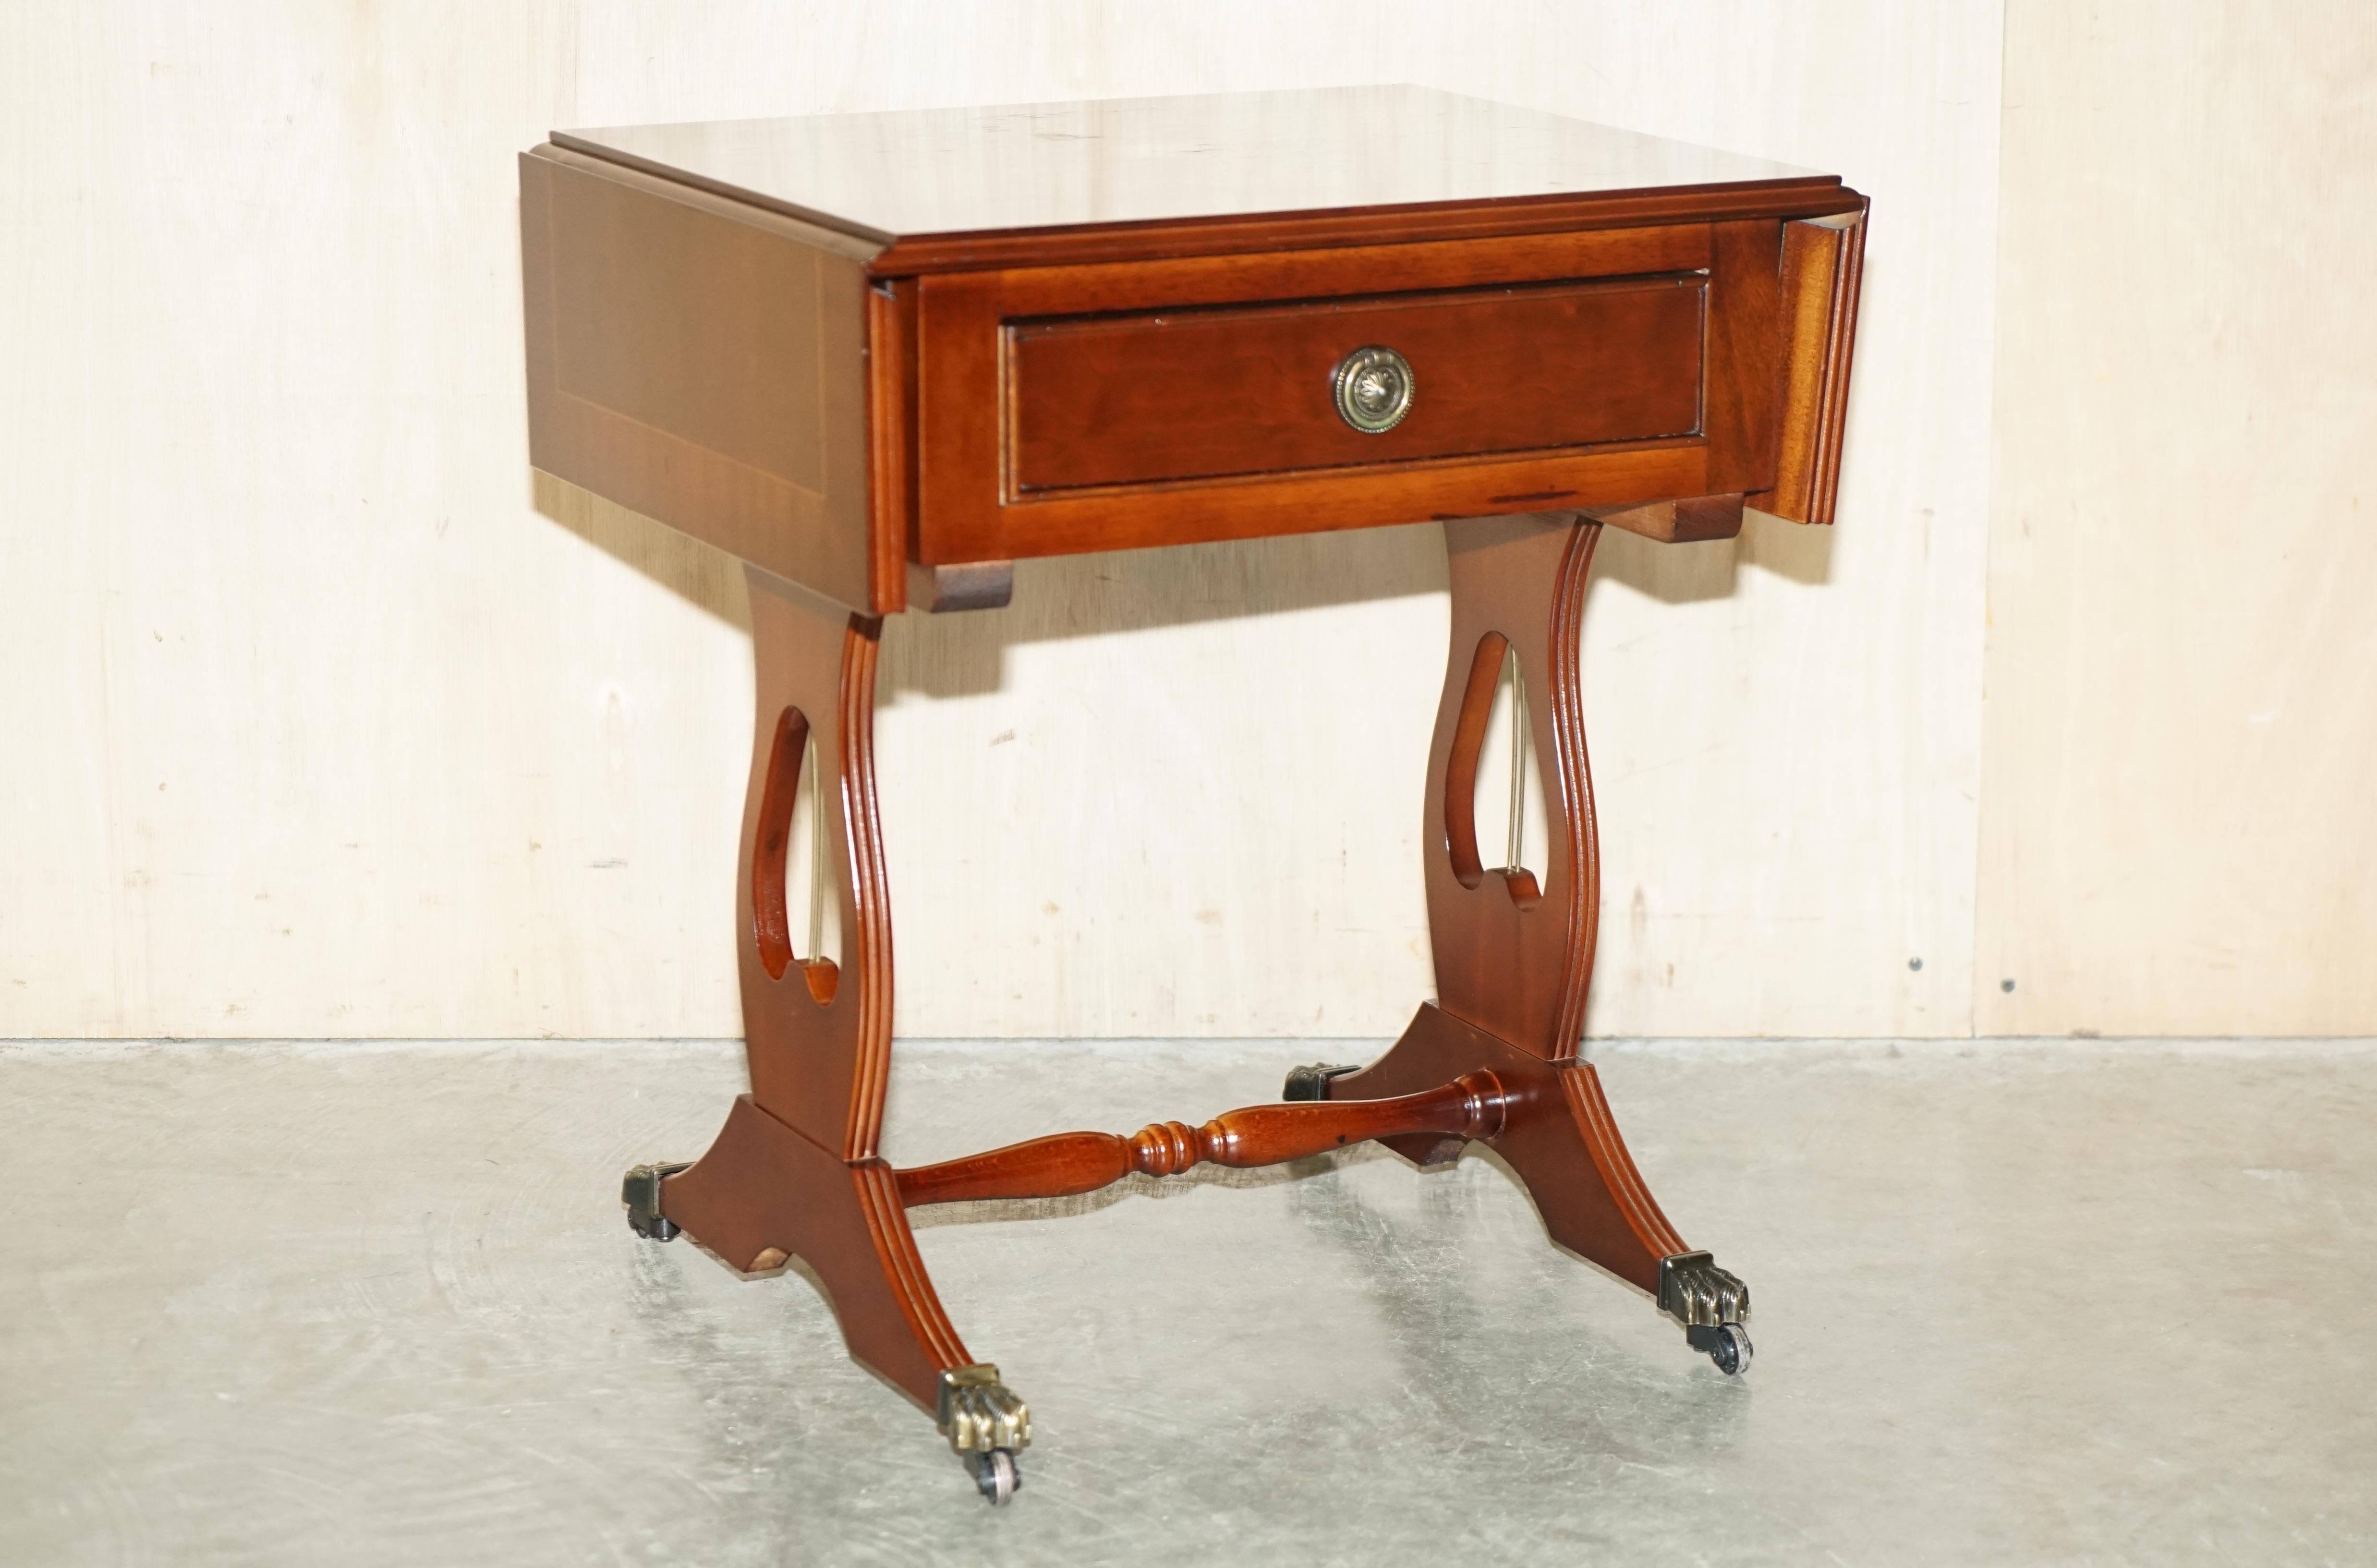 We are delighted to offer for sale this lovely flamed mahogany Bevan Funnell extending side table with a full sized single drawer and Lions's Hairy Paw castors 

This table is very well made, its extends so can be used as a card table or for